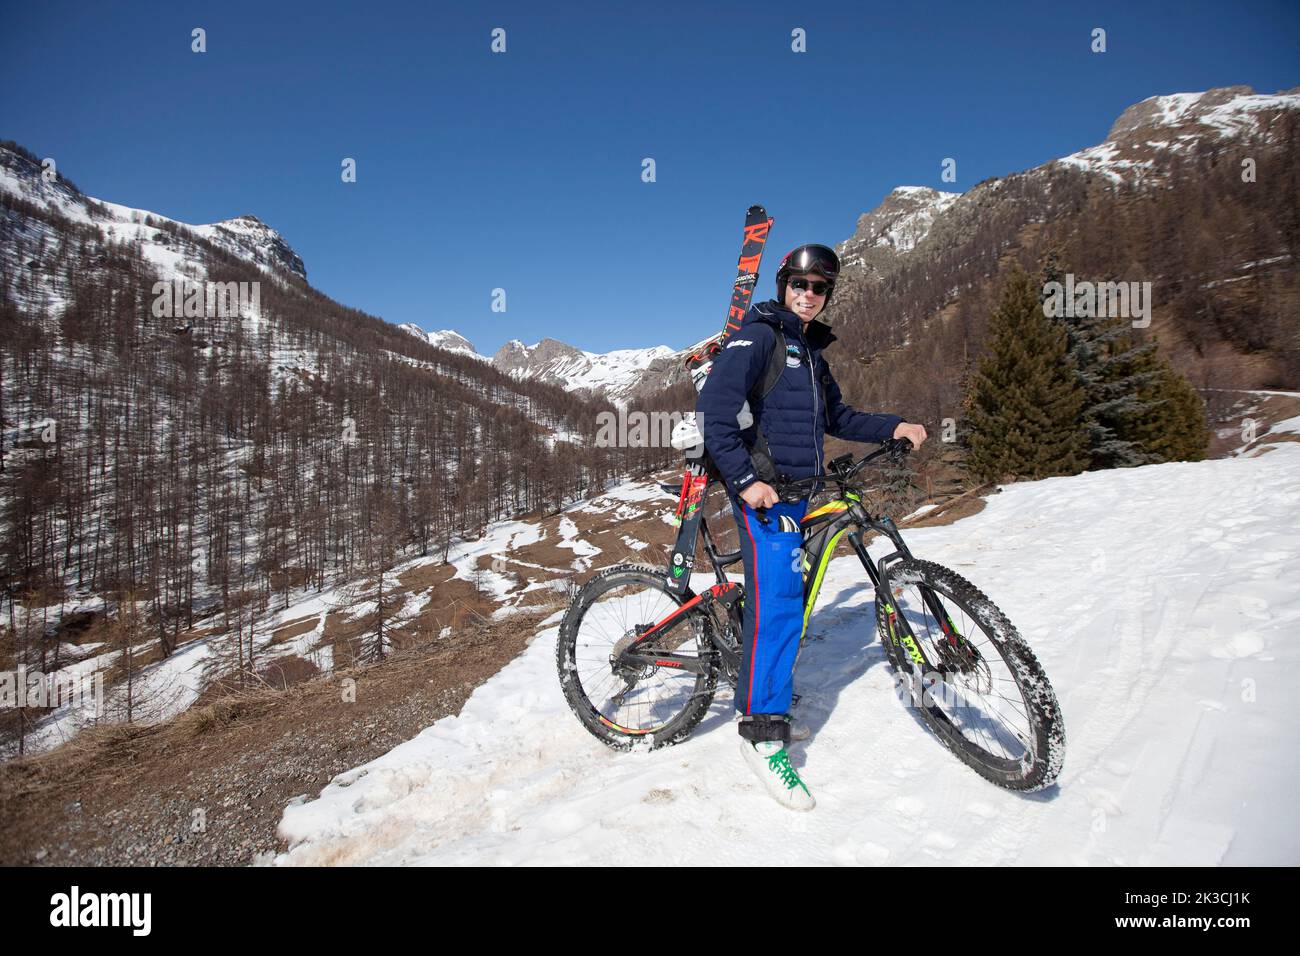 Arthur Bauchet goes skiing in electric mountain bike to raise awareness of renewable energies, France on March 20, 2021. Energy efficiency will be the name of the game in the Alps this winter, with more than a third of resorts renegotiating their supply contracts and anticipating steep increases. According to the France Montagnes organization, 10 million tourists visit the country's ski resorts every winter, most of them in the French Alps, which host the largest concentration of resorts in the country – almost 200. All of them are subject to a public service contract that considers their ski Stock Photo